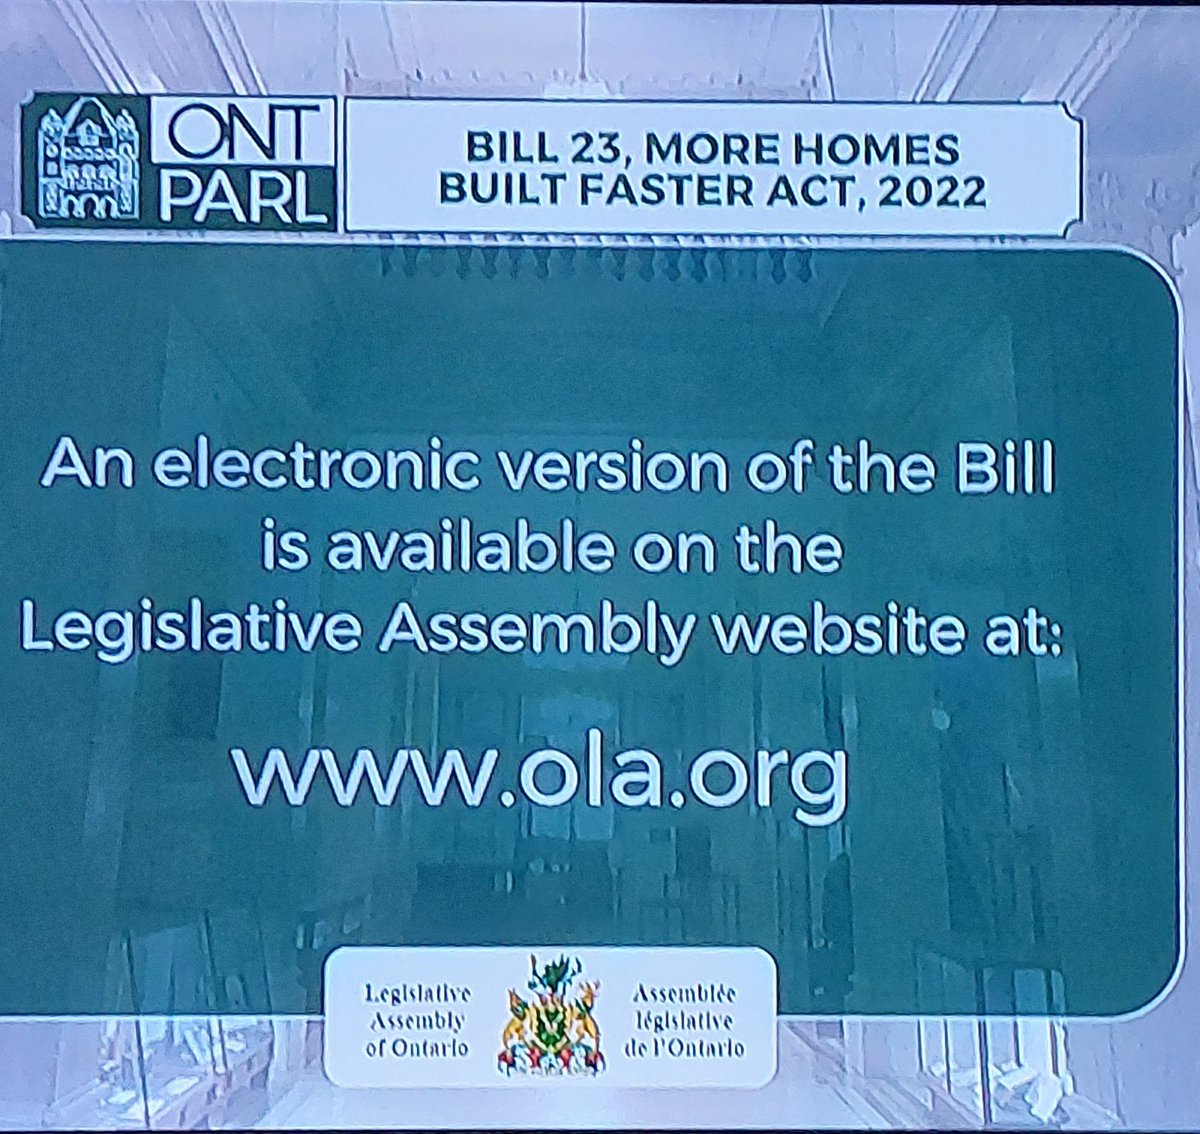 Faster Homes = Fast ChainSaw #Construction = No More #SwampRat = No More #NeighbourhoodDoughnut regulations = #OnPurpose Politics 
We will be PAYING for #infrastructure while #builders Win. 
Bill23 changes ALOT of other Bills Too. Ontario #confirmed Greed